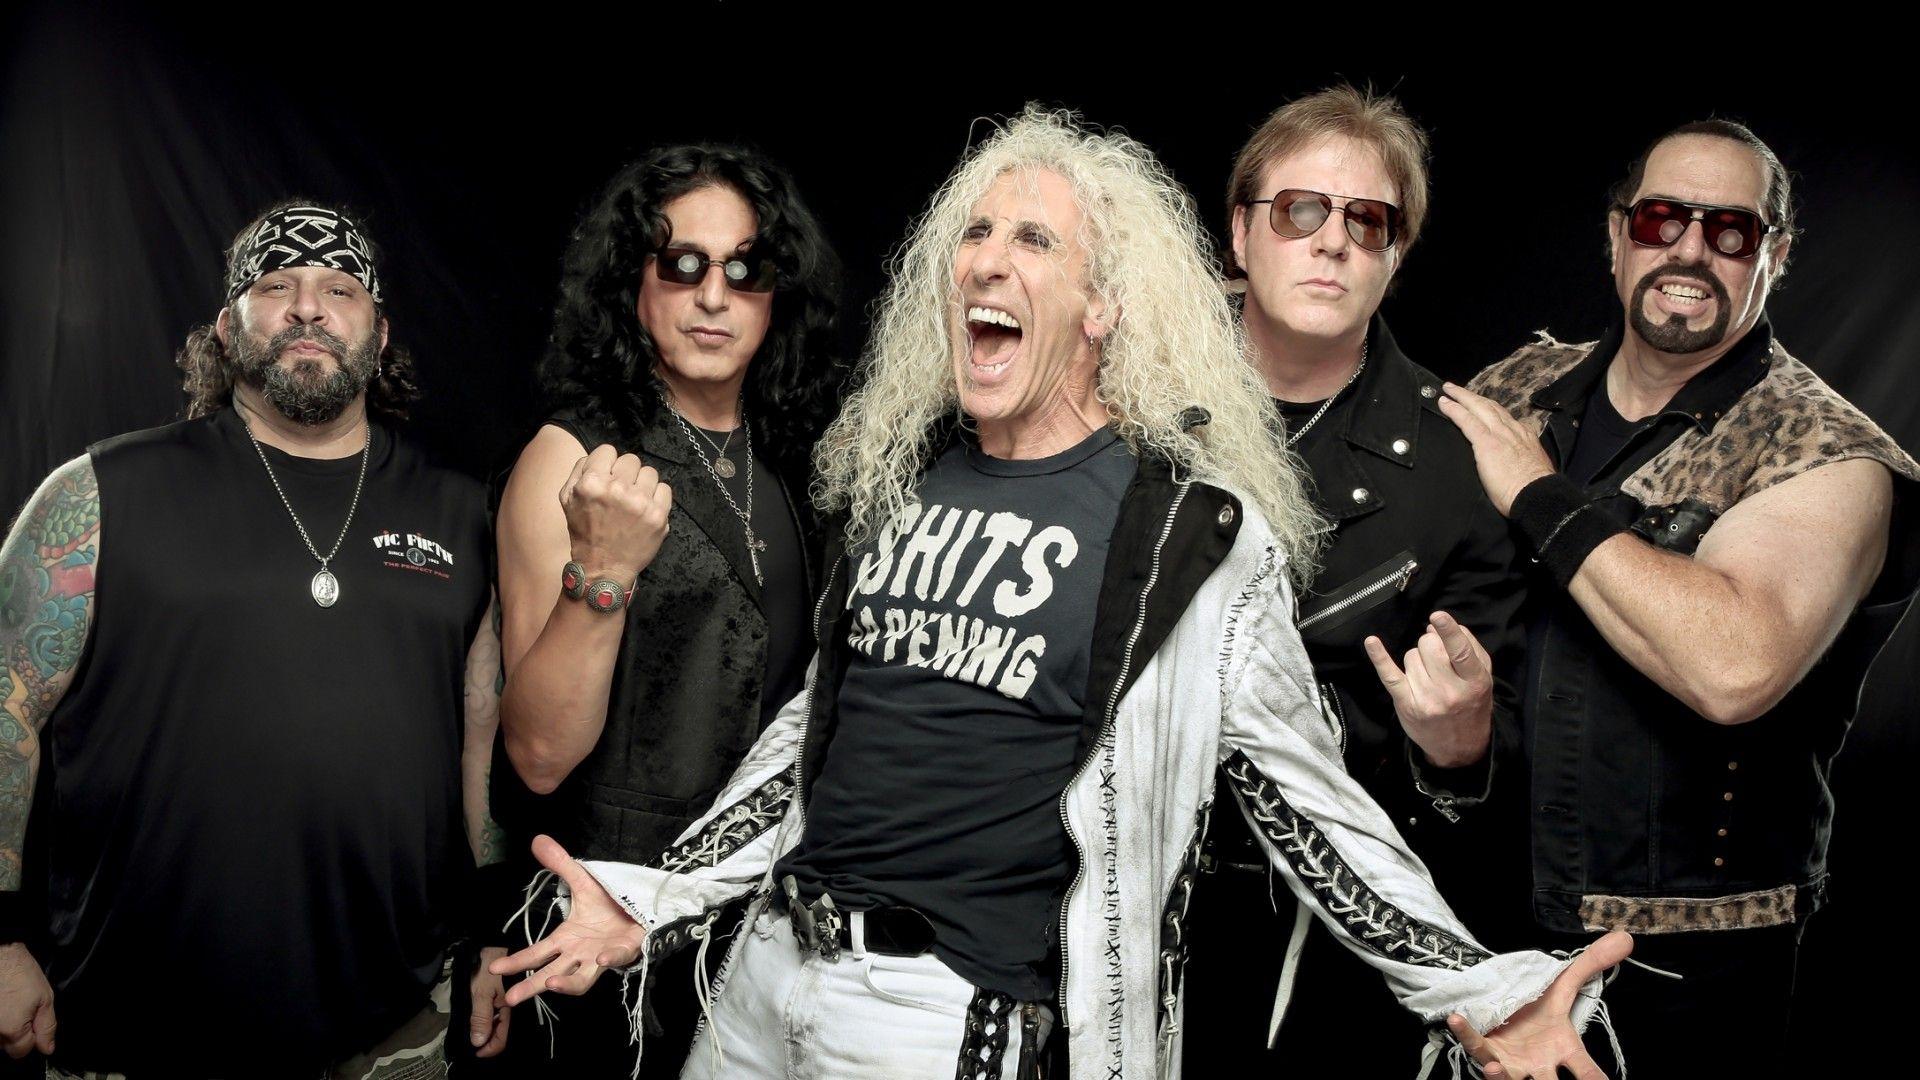 Download 1920x1080 Twisted Sister, Heavy Metal, Music Wallpaper